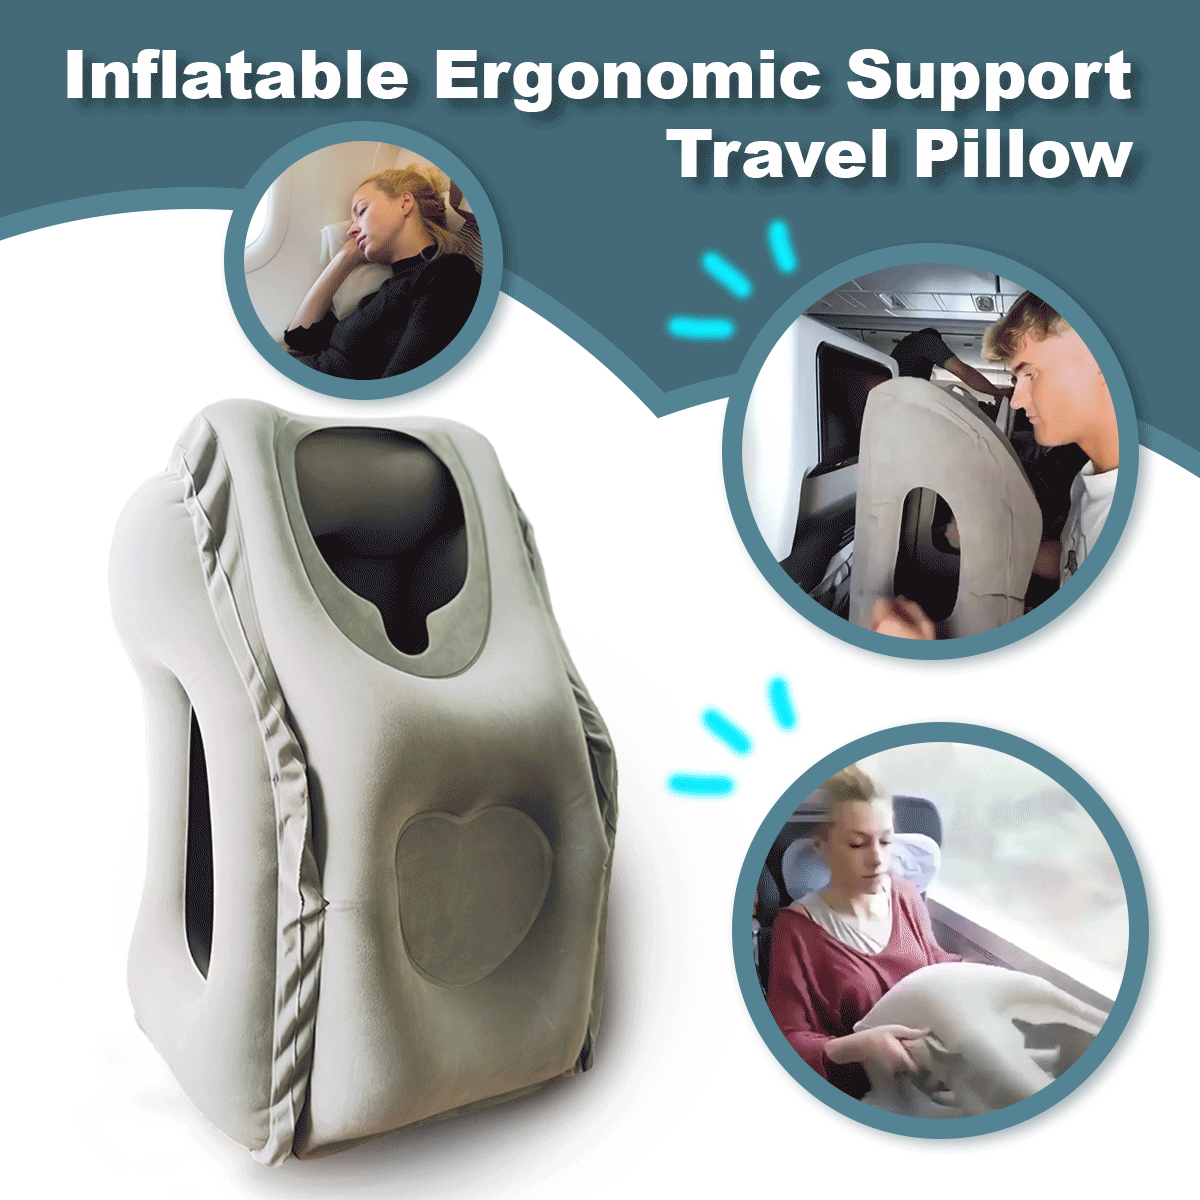 Inflatable Ergonomic Support Travel Pillow